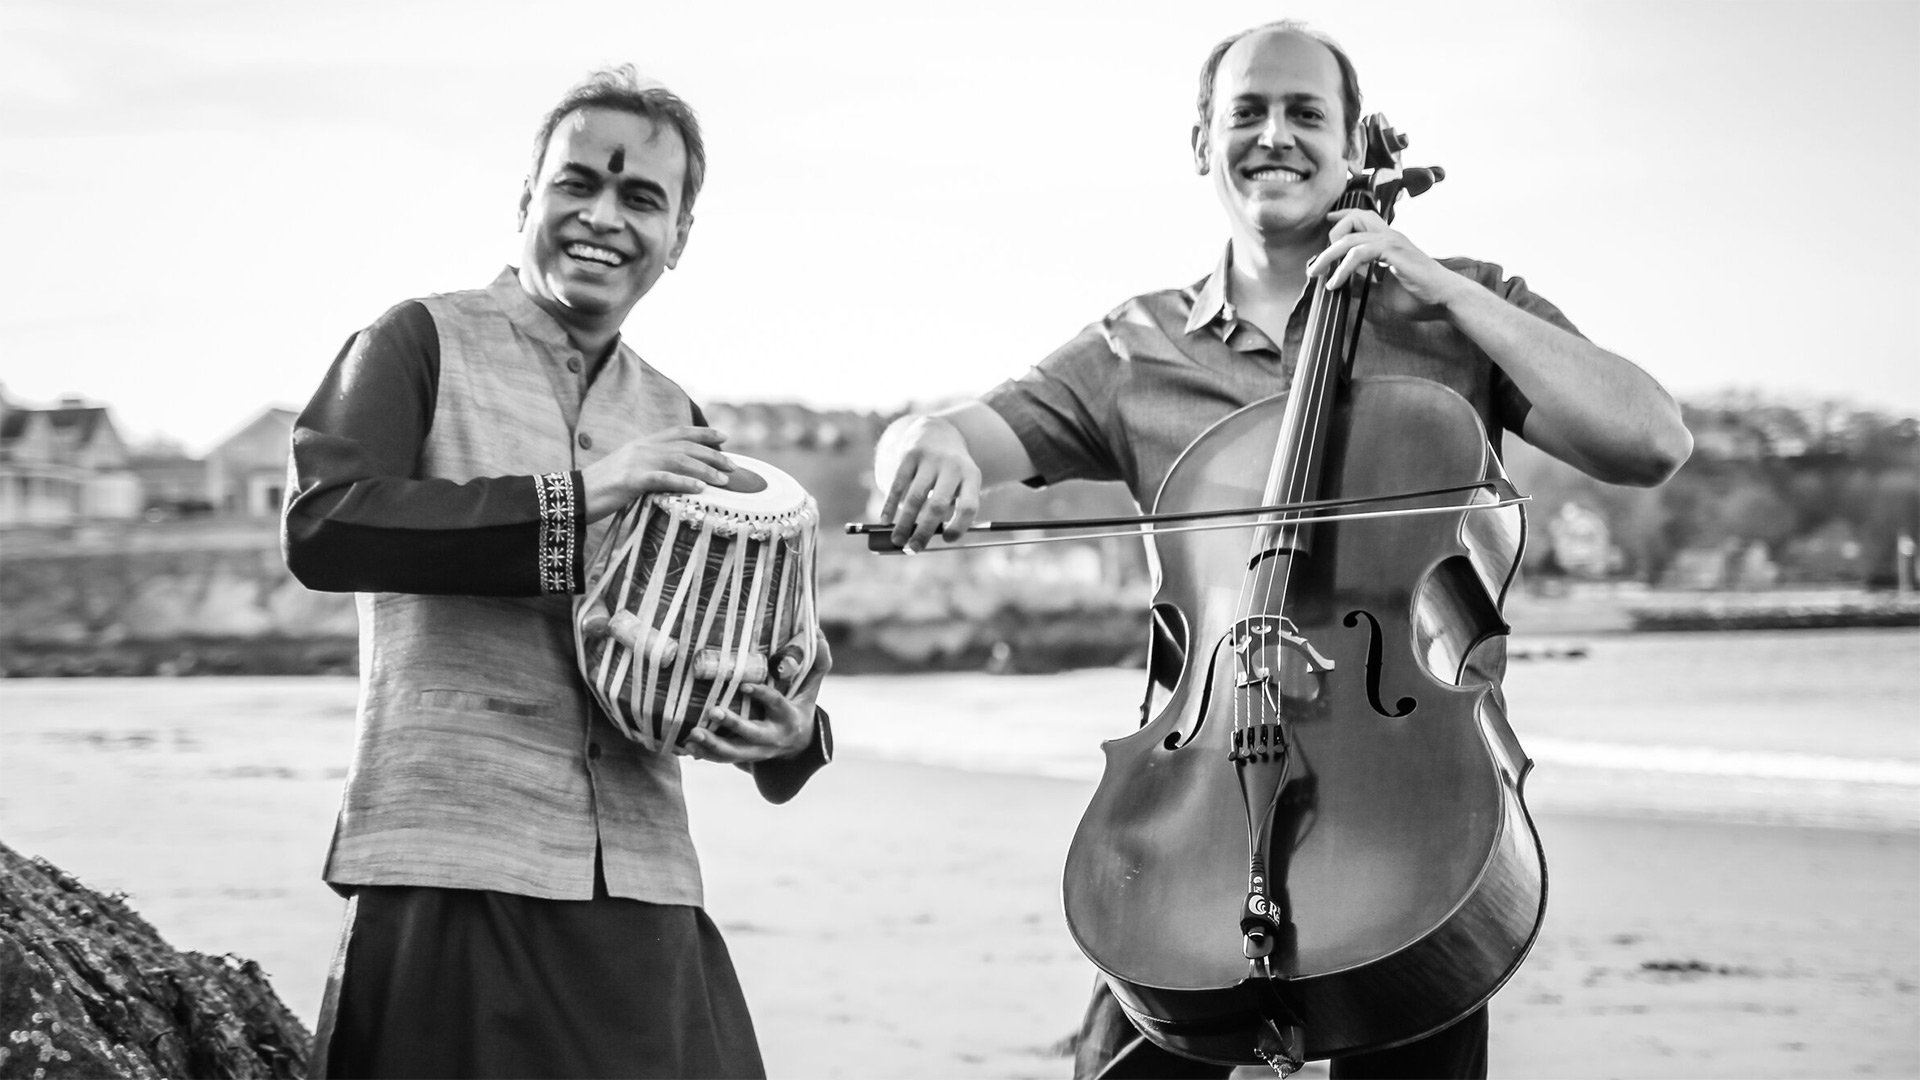 Grayscale image of Sandeep Das playing the tabla, an Indian drum, on the left and Mike Block playing the cello on the right.